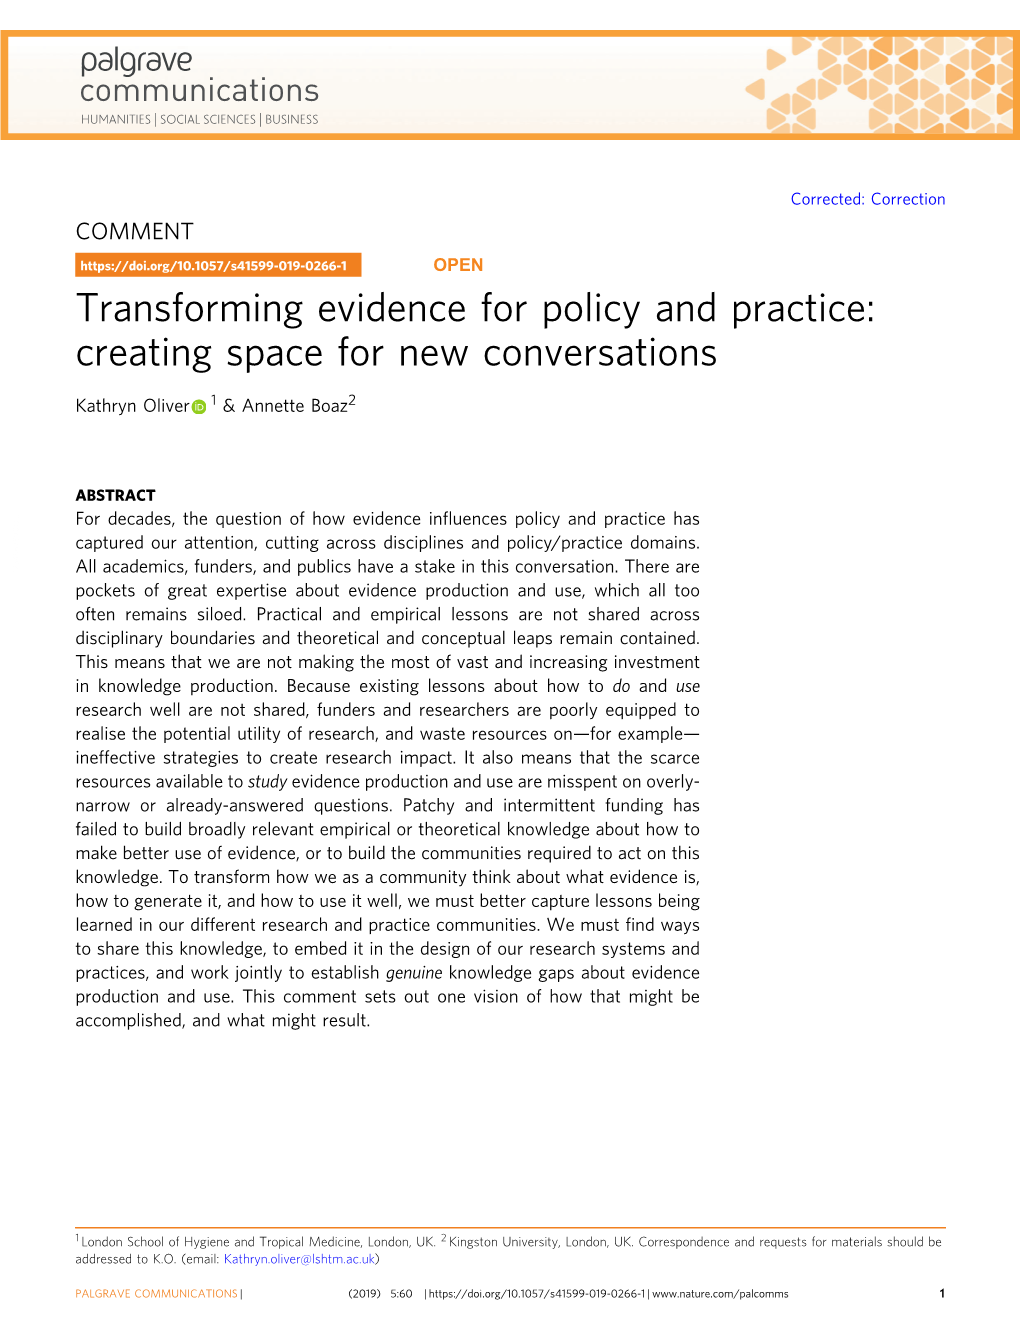 Transforming Evidence for Policy and Practice: Creating Space for New Conversations